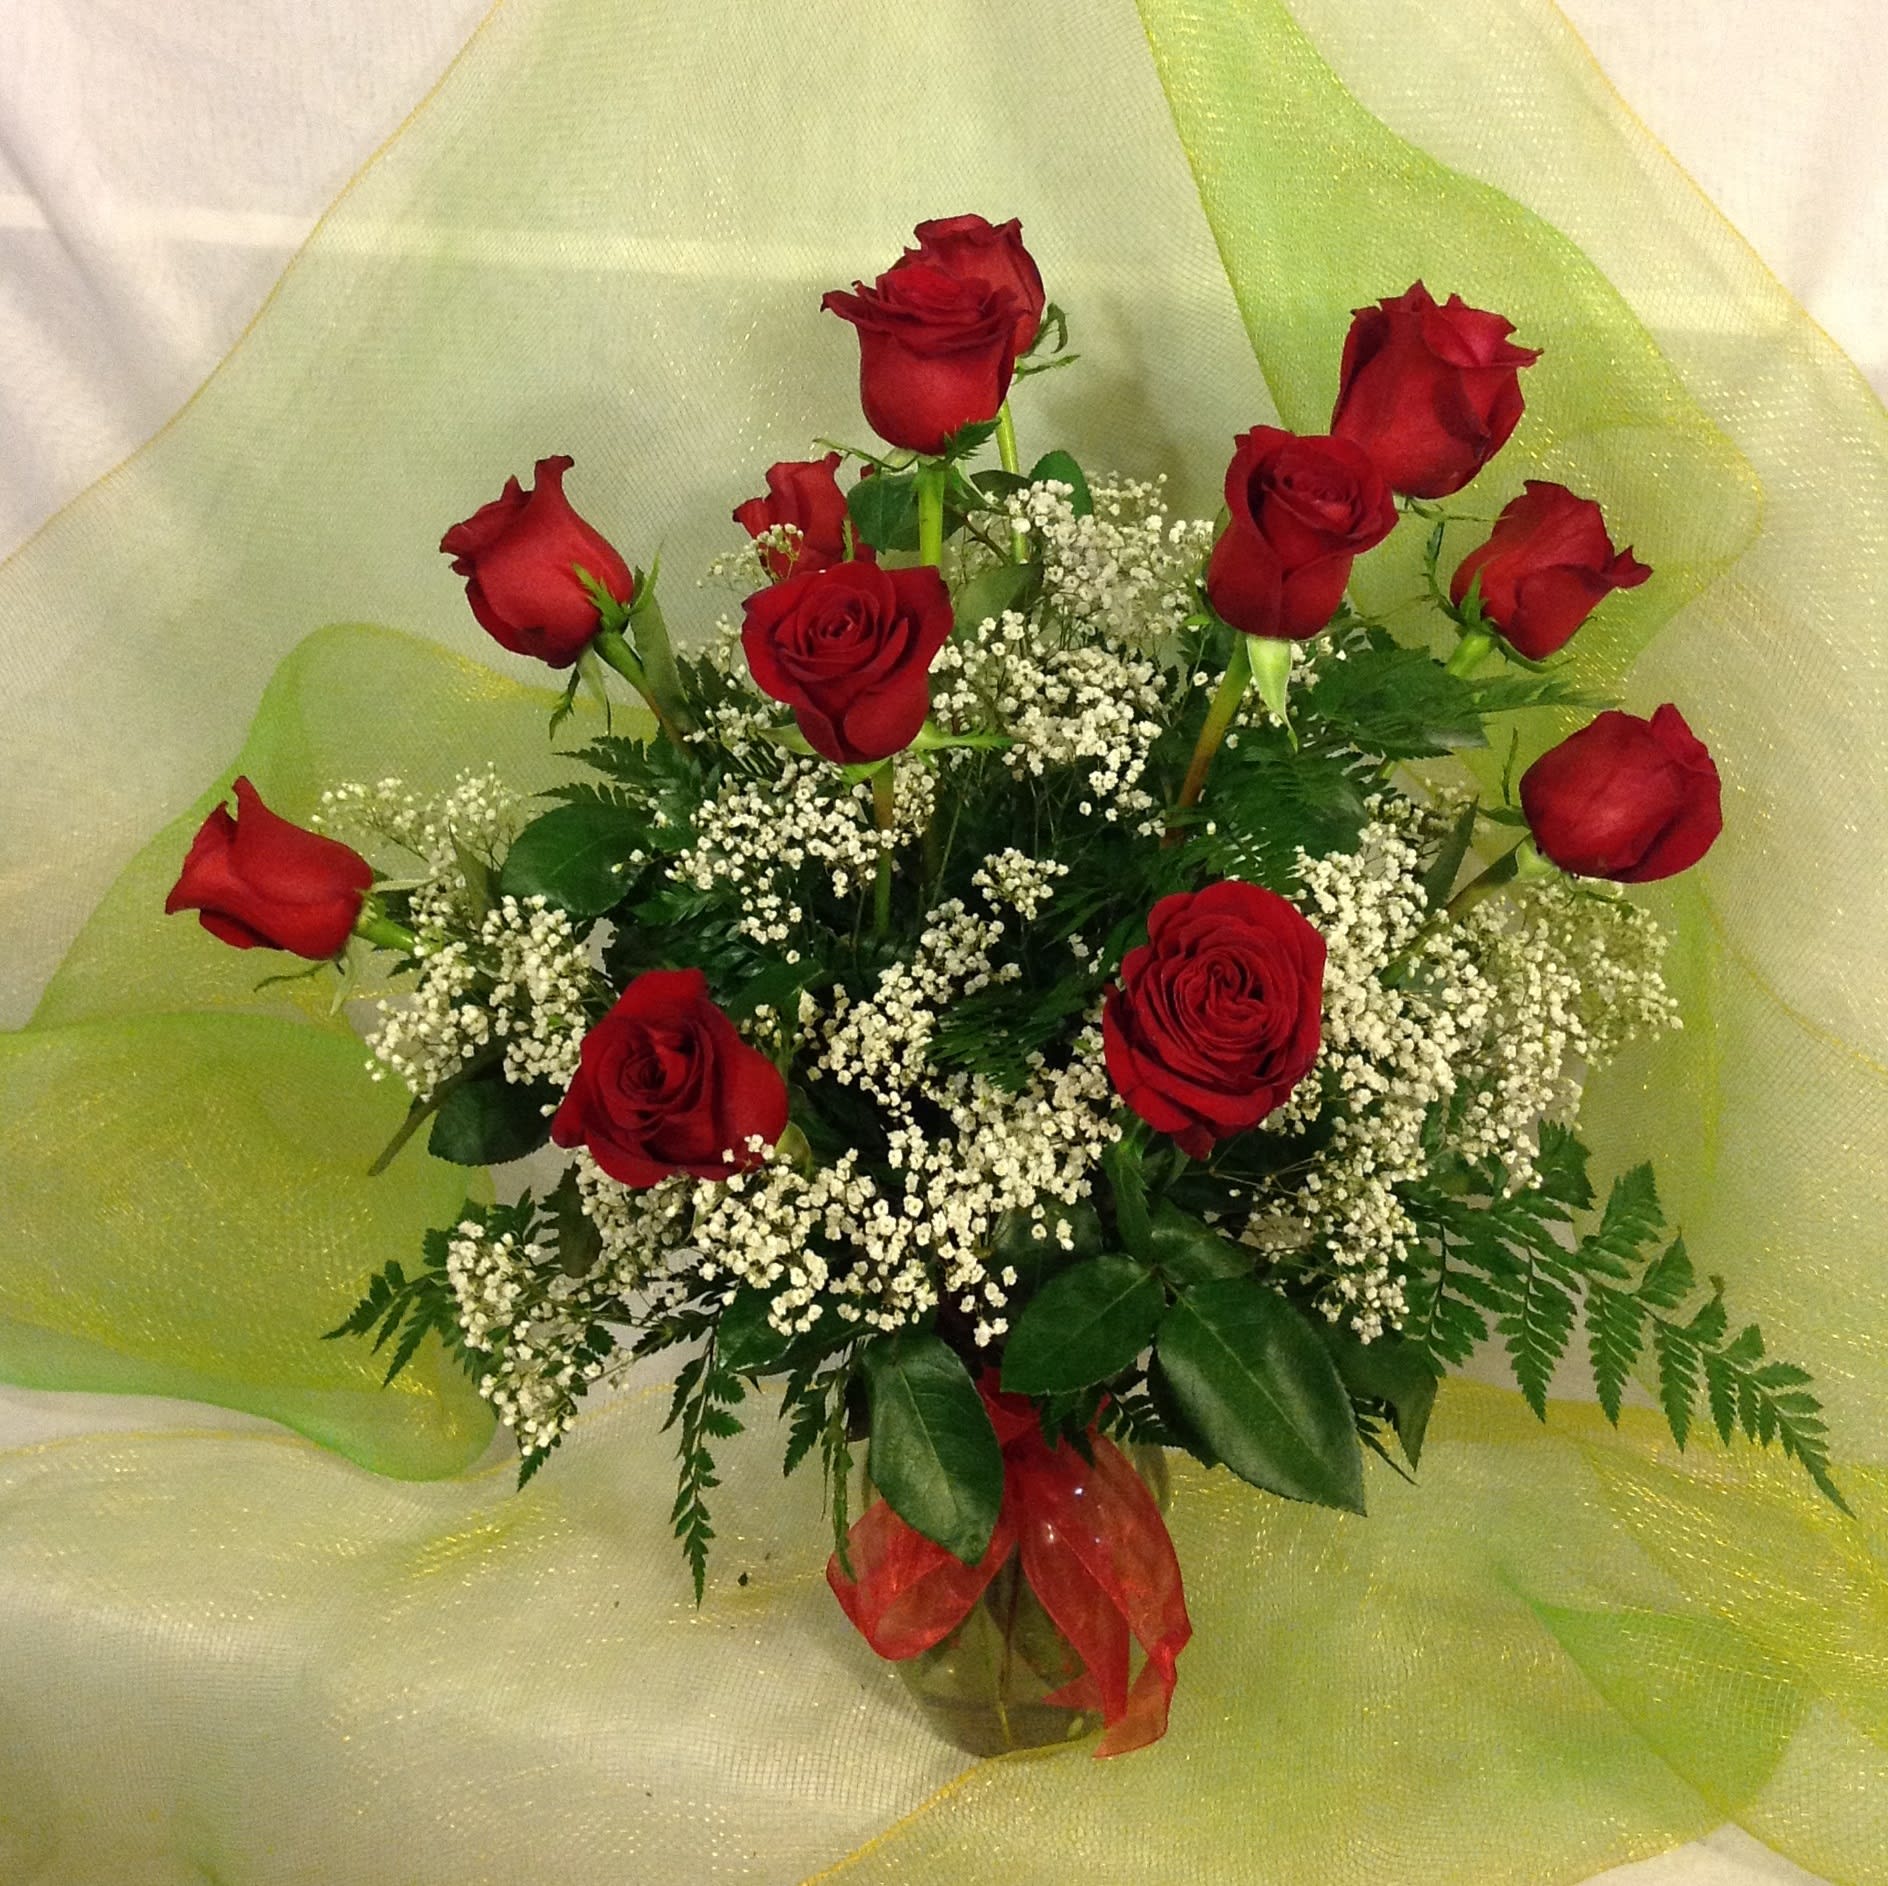 True Love Rose Bouquet  - One dozen Premium Rose Bouquet is the perfect expression of love and passion. This bouquet combines red roses in a beautiful glass vase, accented with greens and baby's breath to create a truly representation of your love